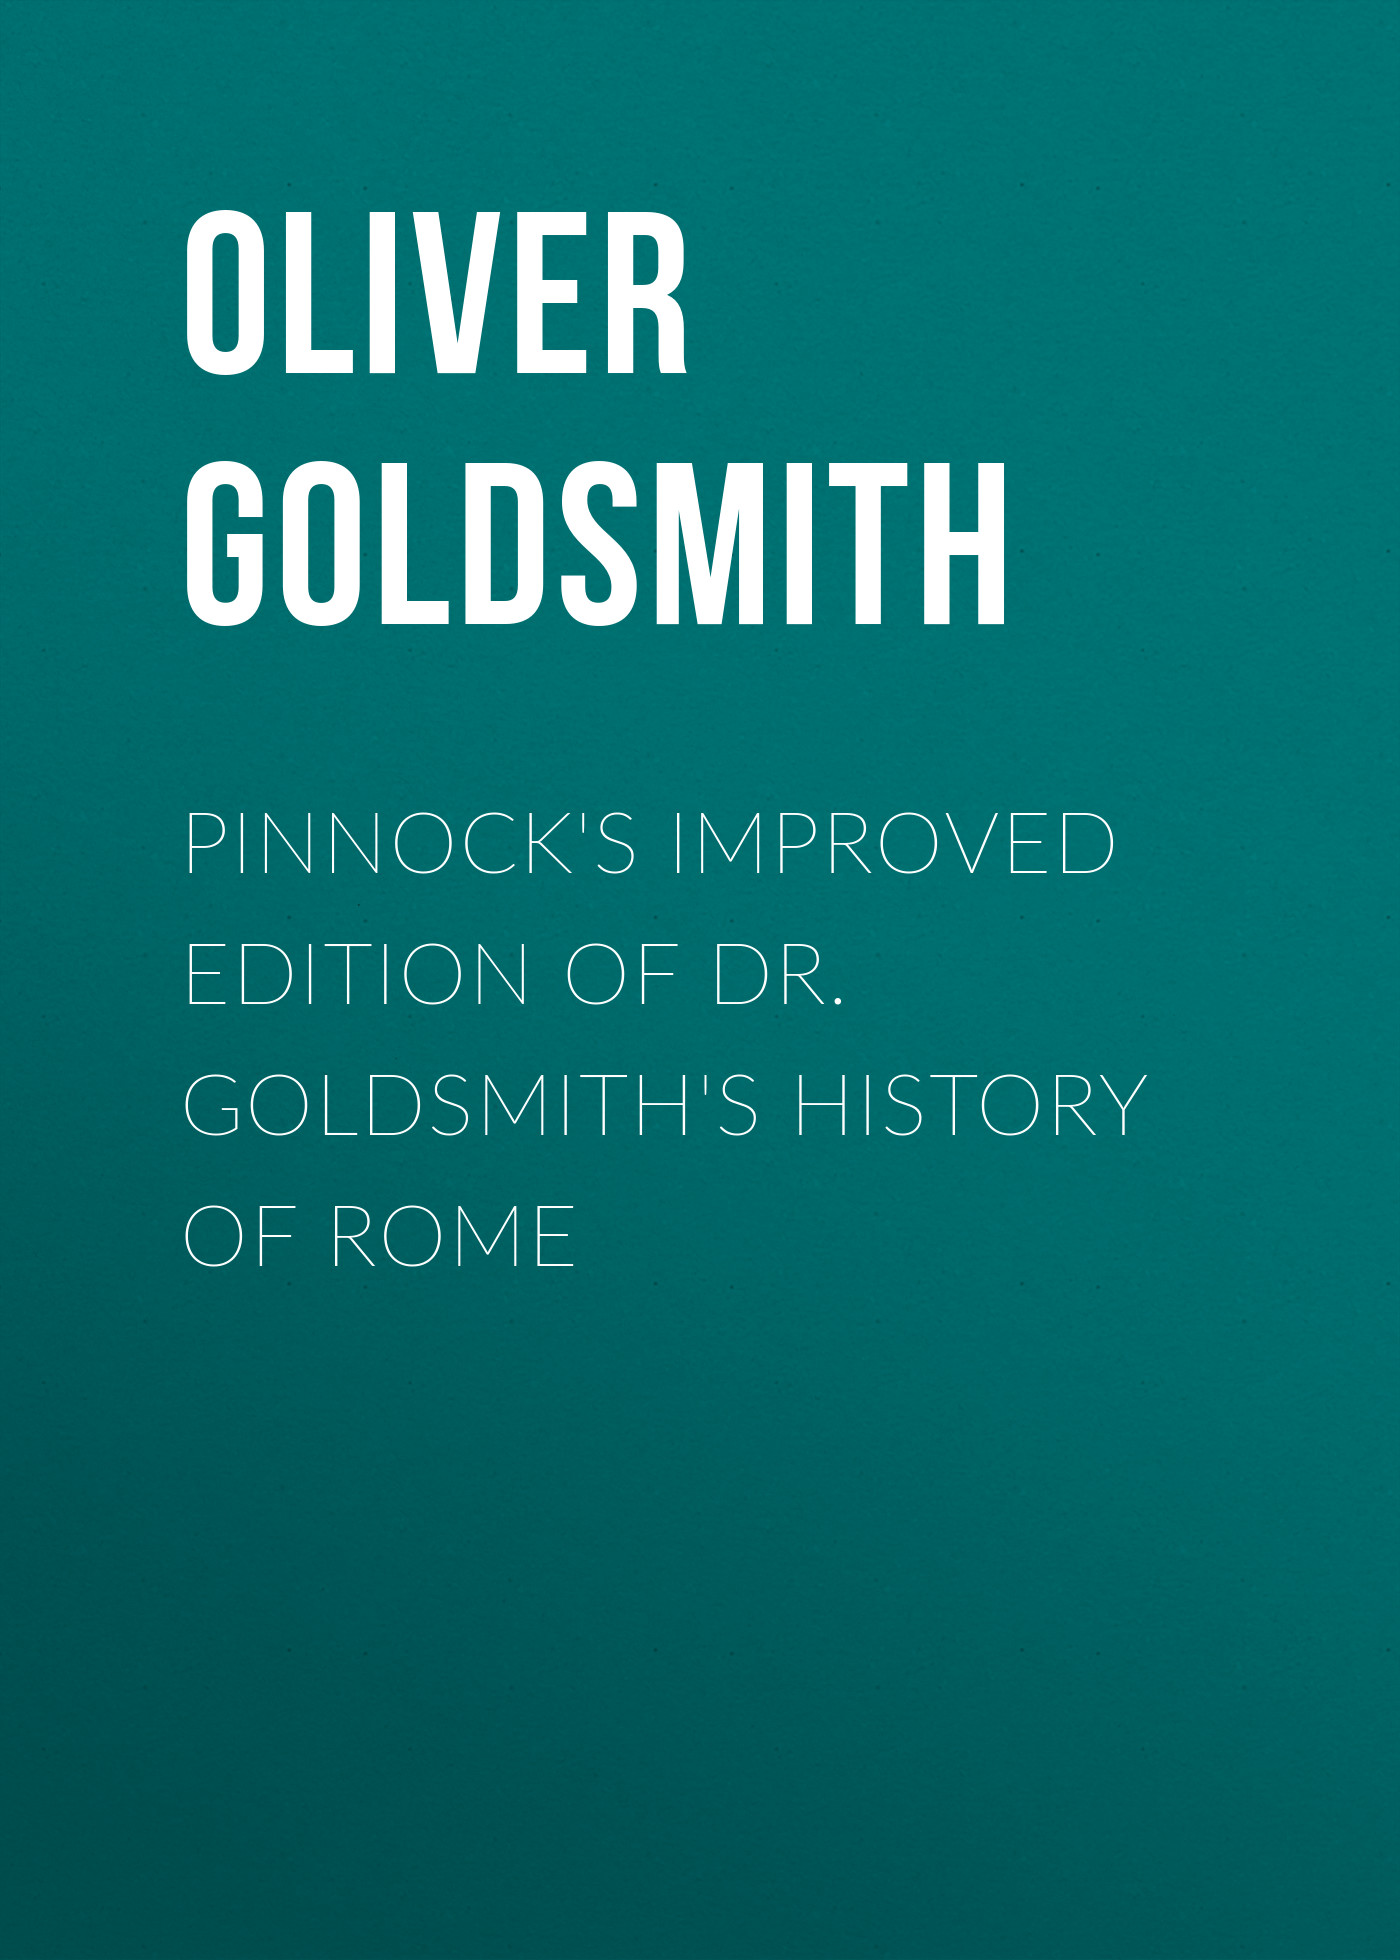 Pinnock\'s improved edition of Dr. Goldsmith\'s History of Rome